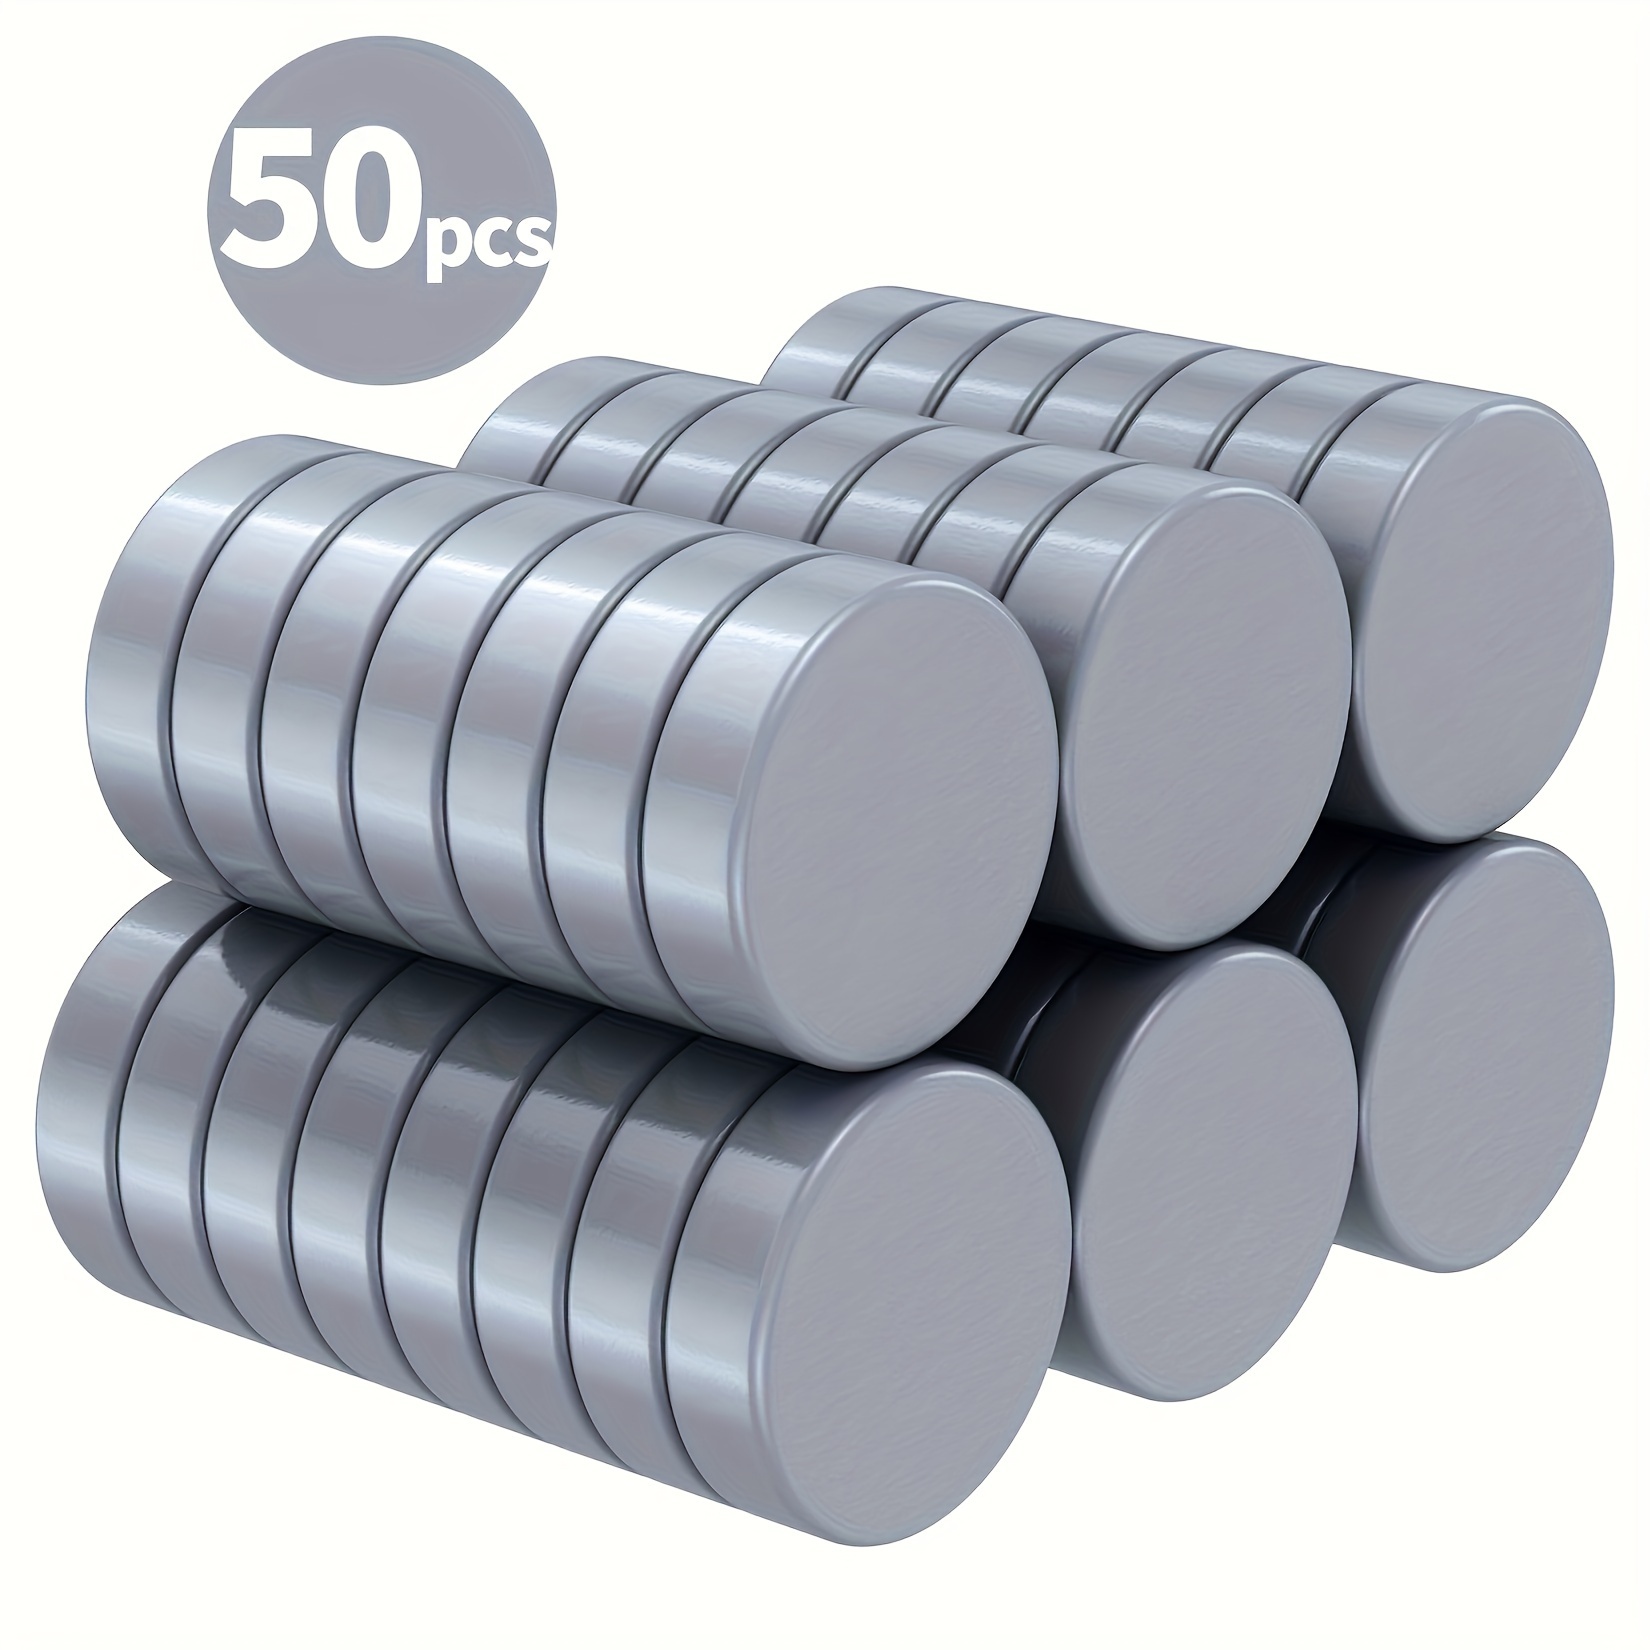 

50pcs, Small Magnets, Neodymium Magnet, Rare Earth Magnets, Thin Magnets, Round Durable Small Magnets For Fridge, Whiteboards, Photos, Stickers, Postcards, Tools, Home Items